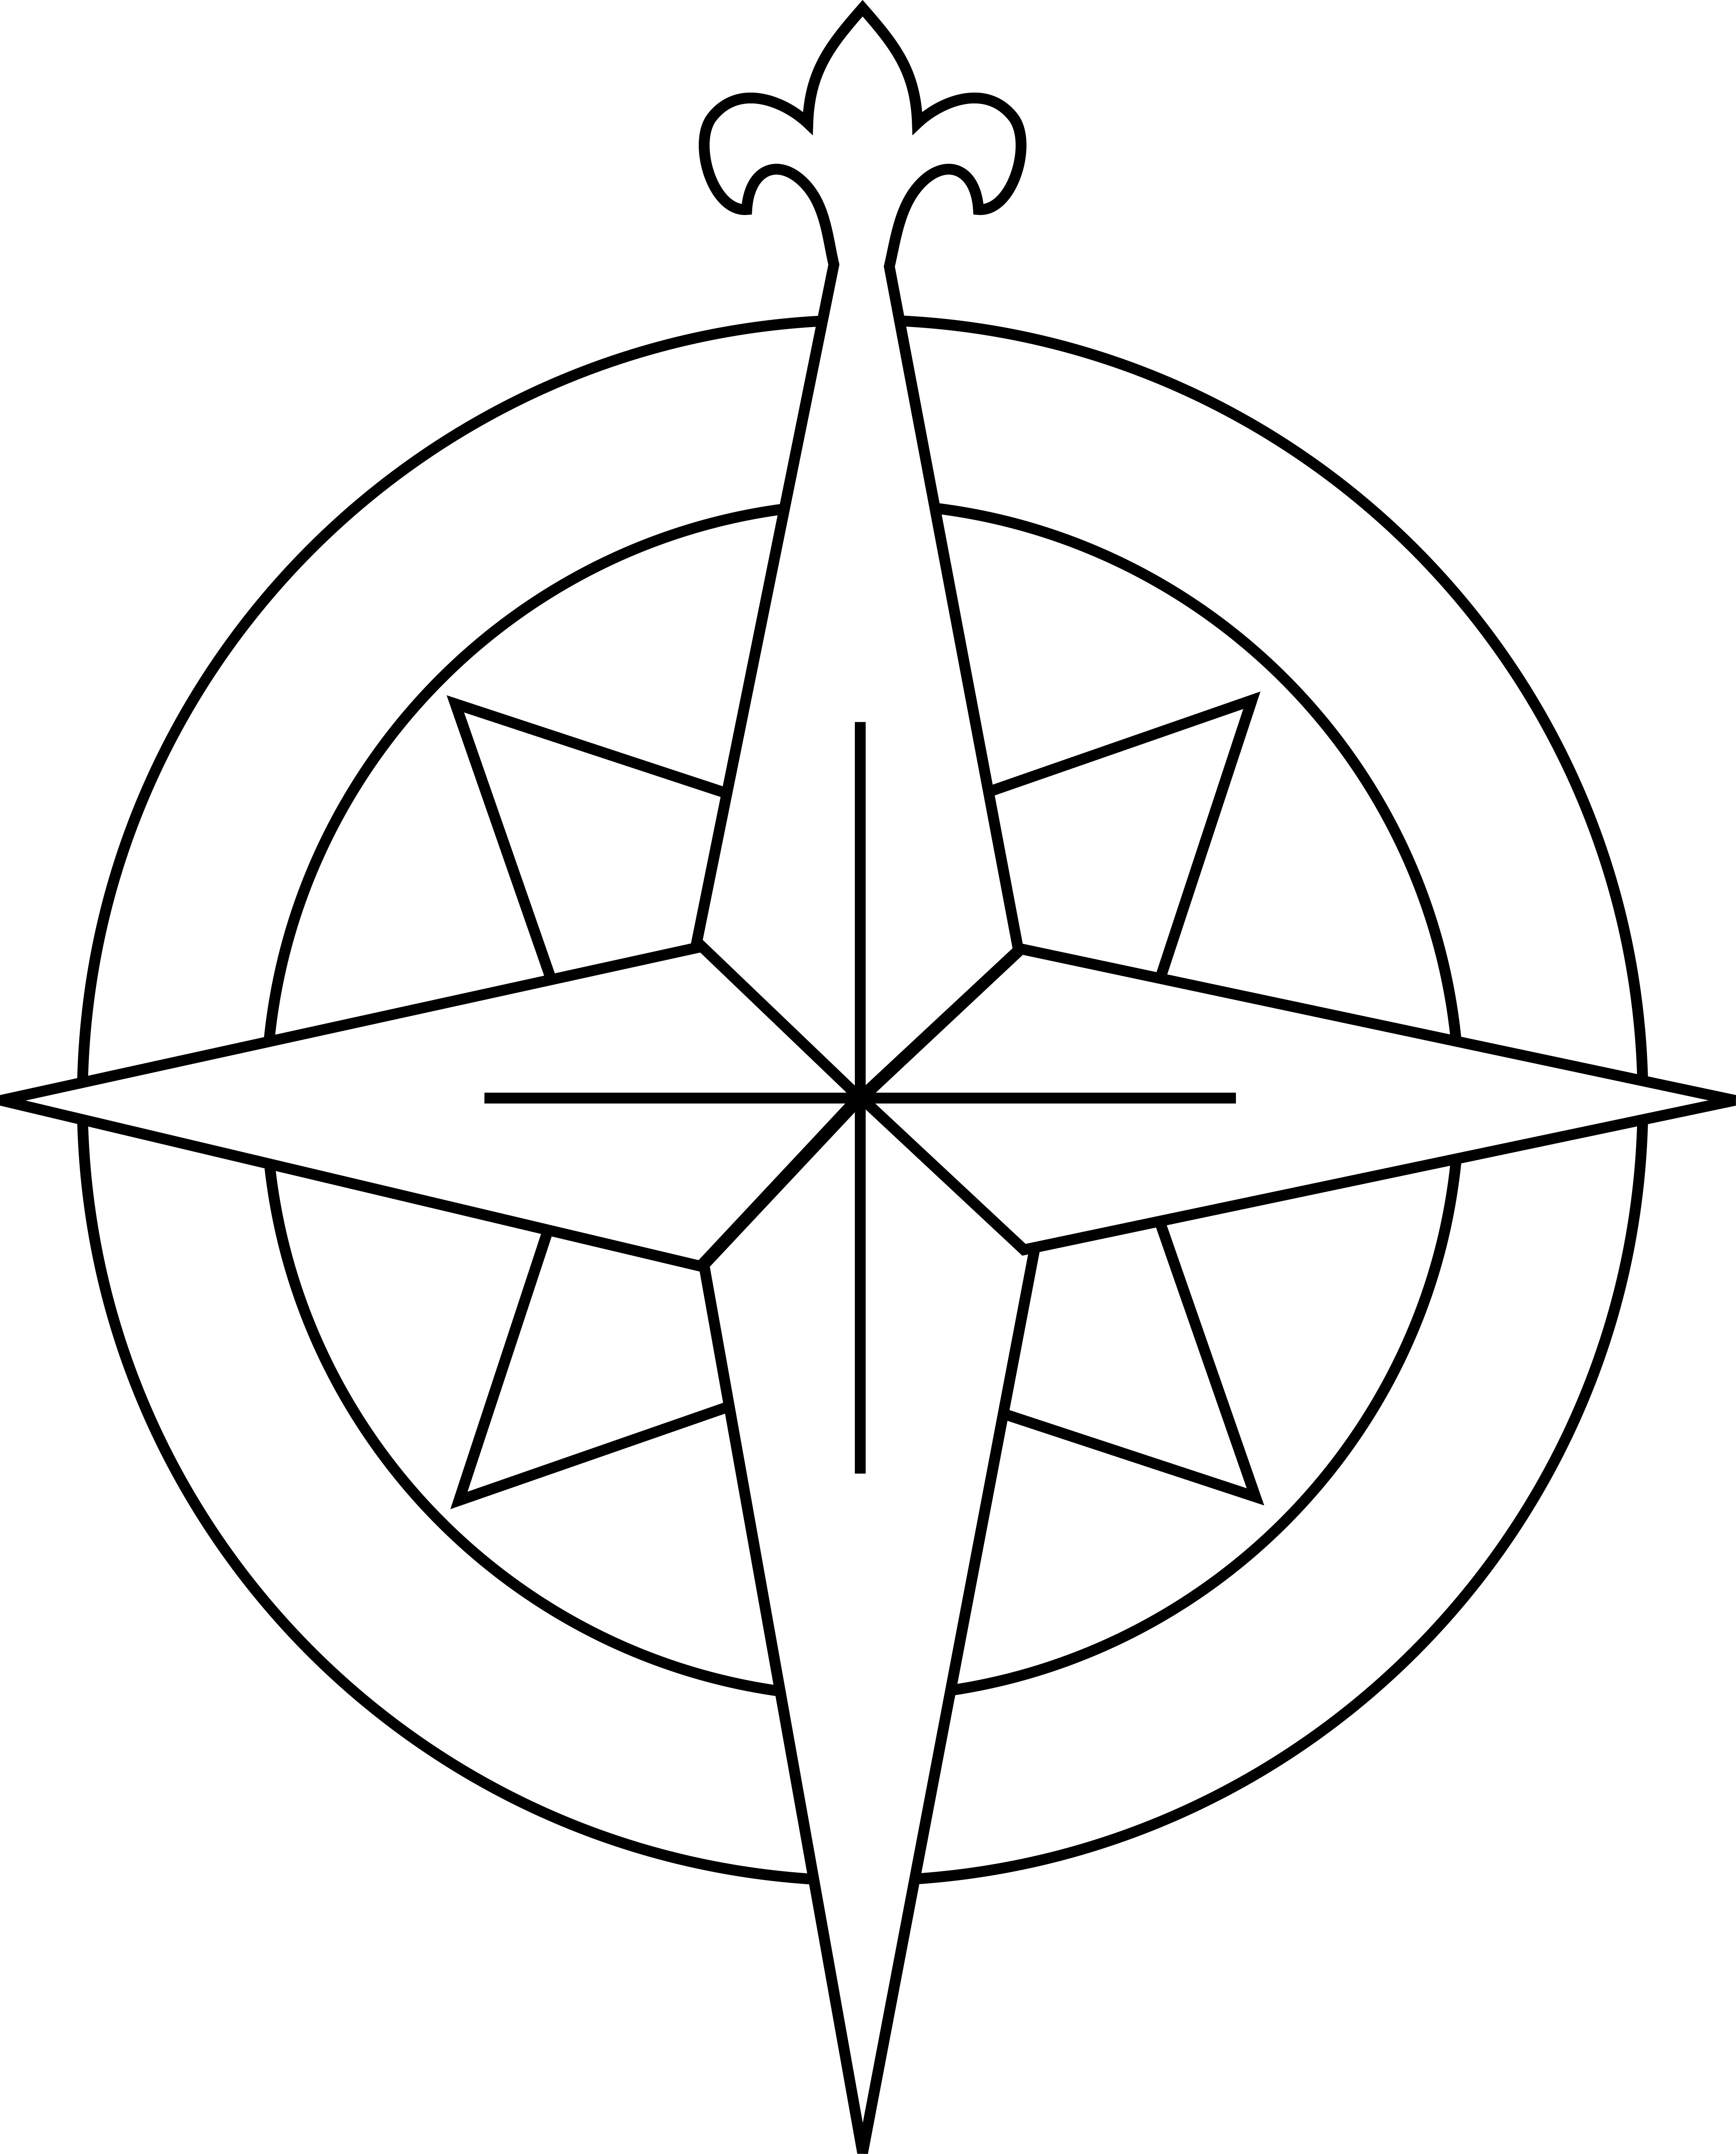 Free Compass Rose Template Download Free Compass Rose Template Png Images Free ClipArts On